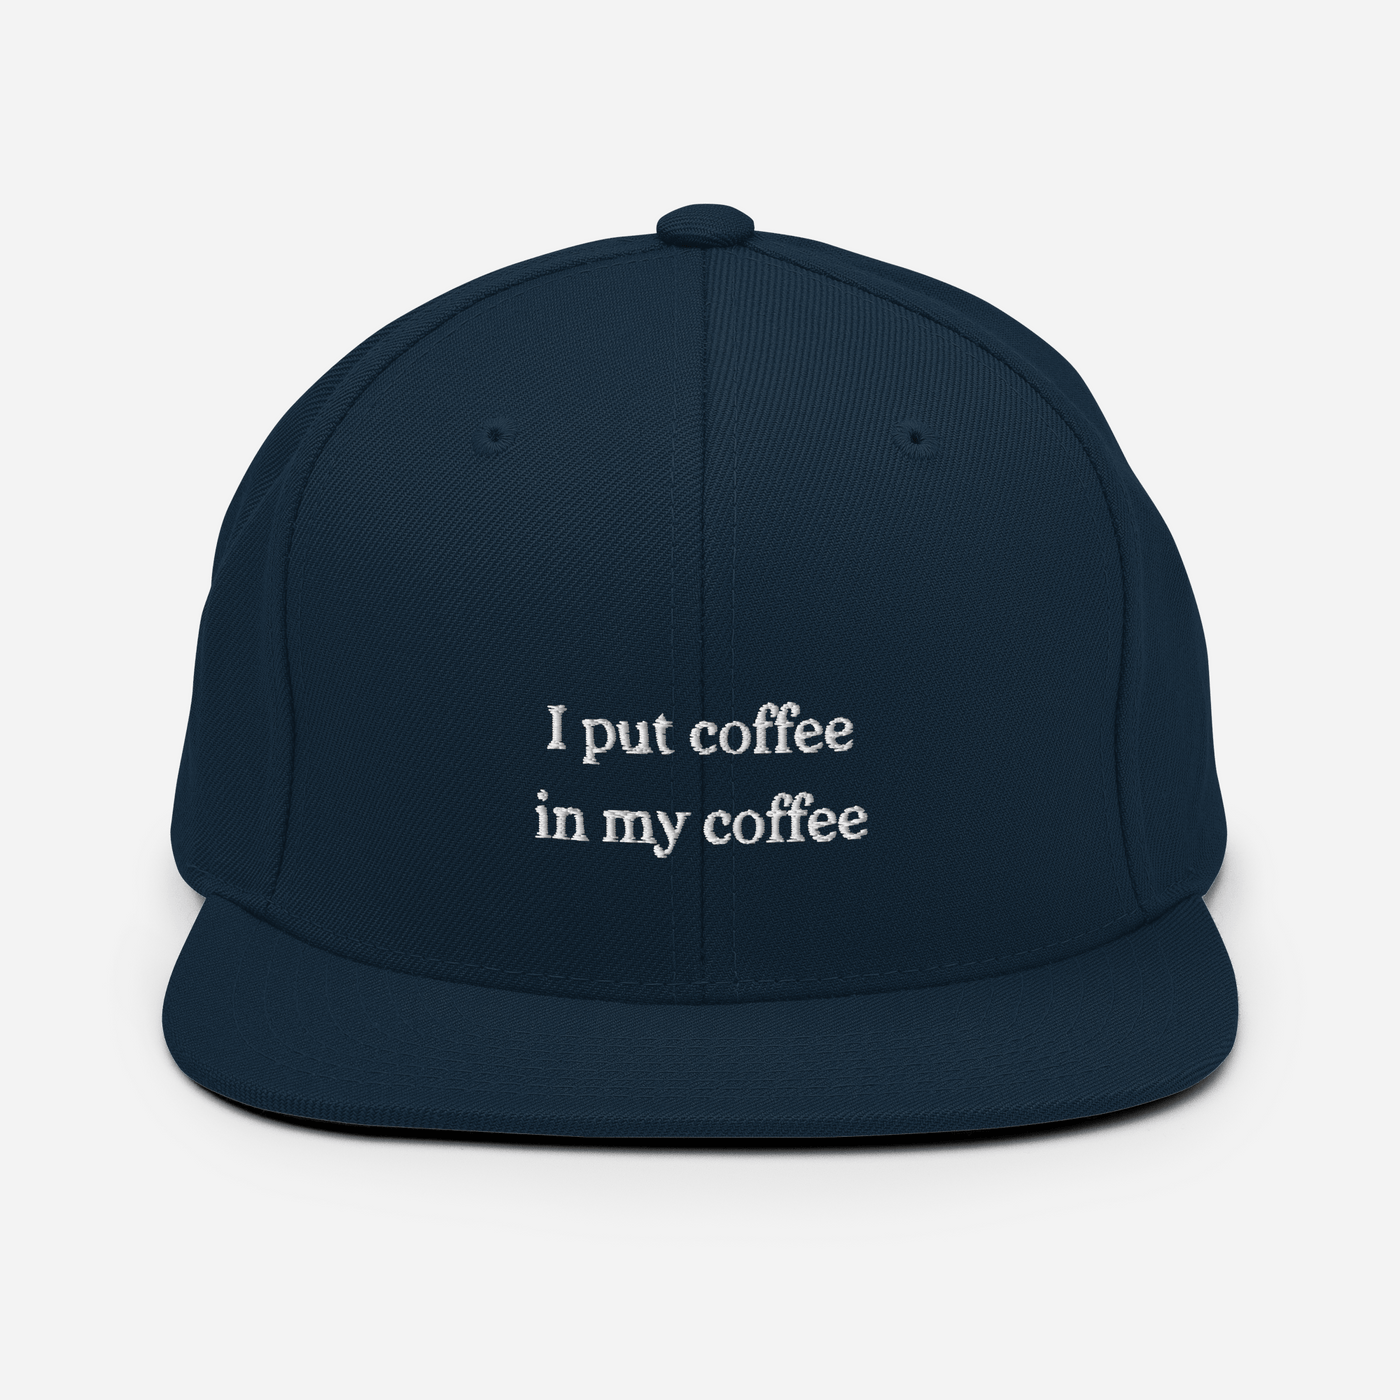 I put coffee in my coffee Snapback Hat - Dark Navy - - Just Another Cap Store